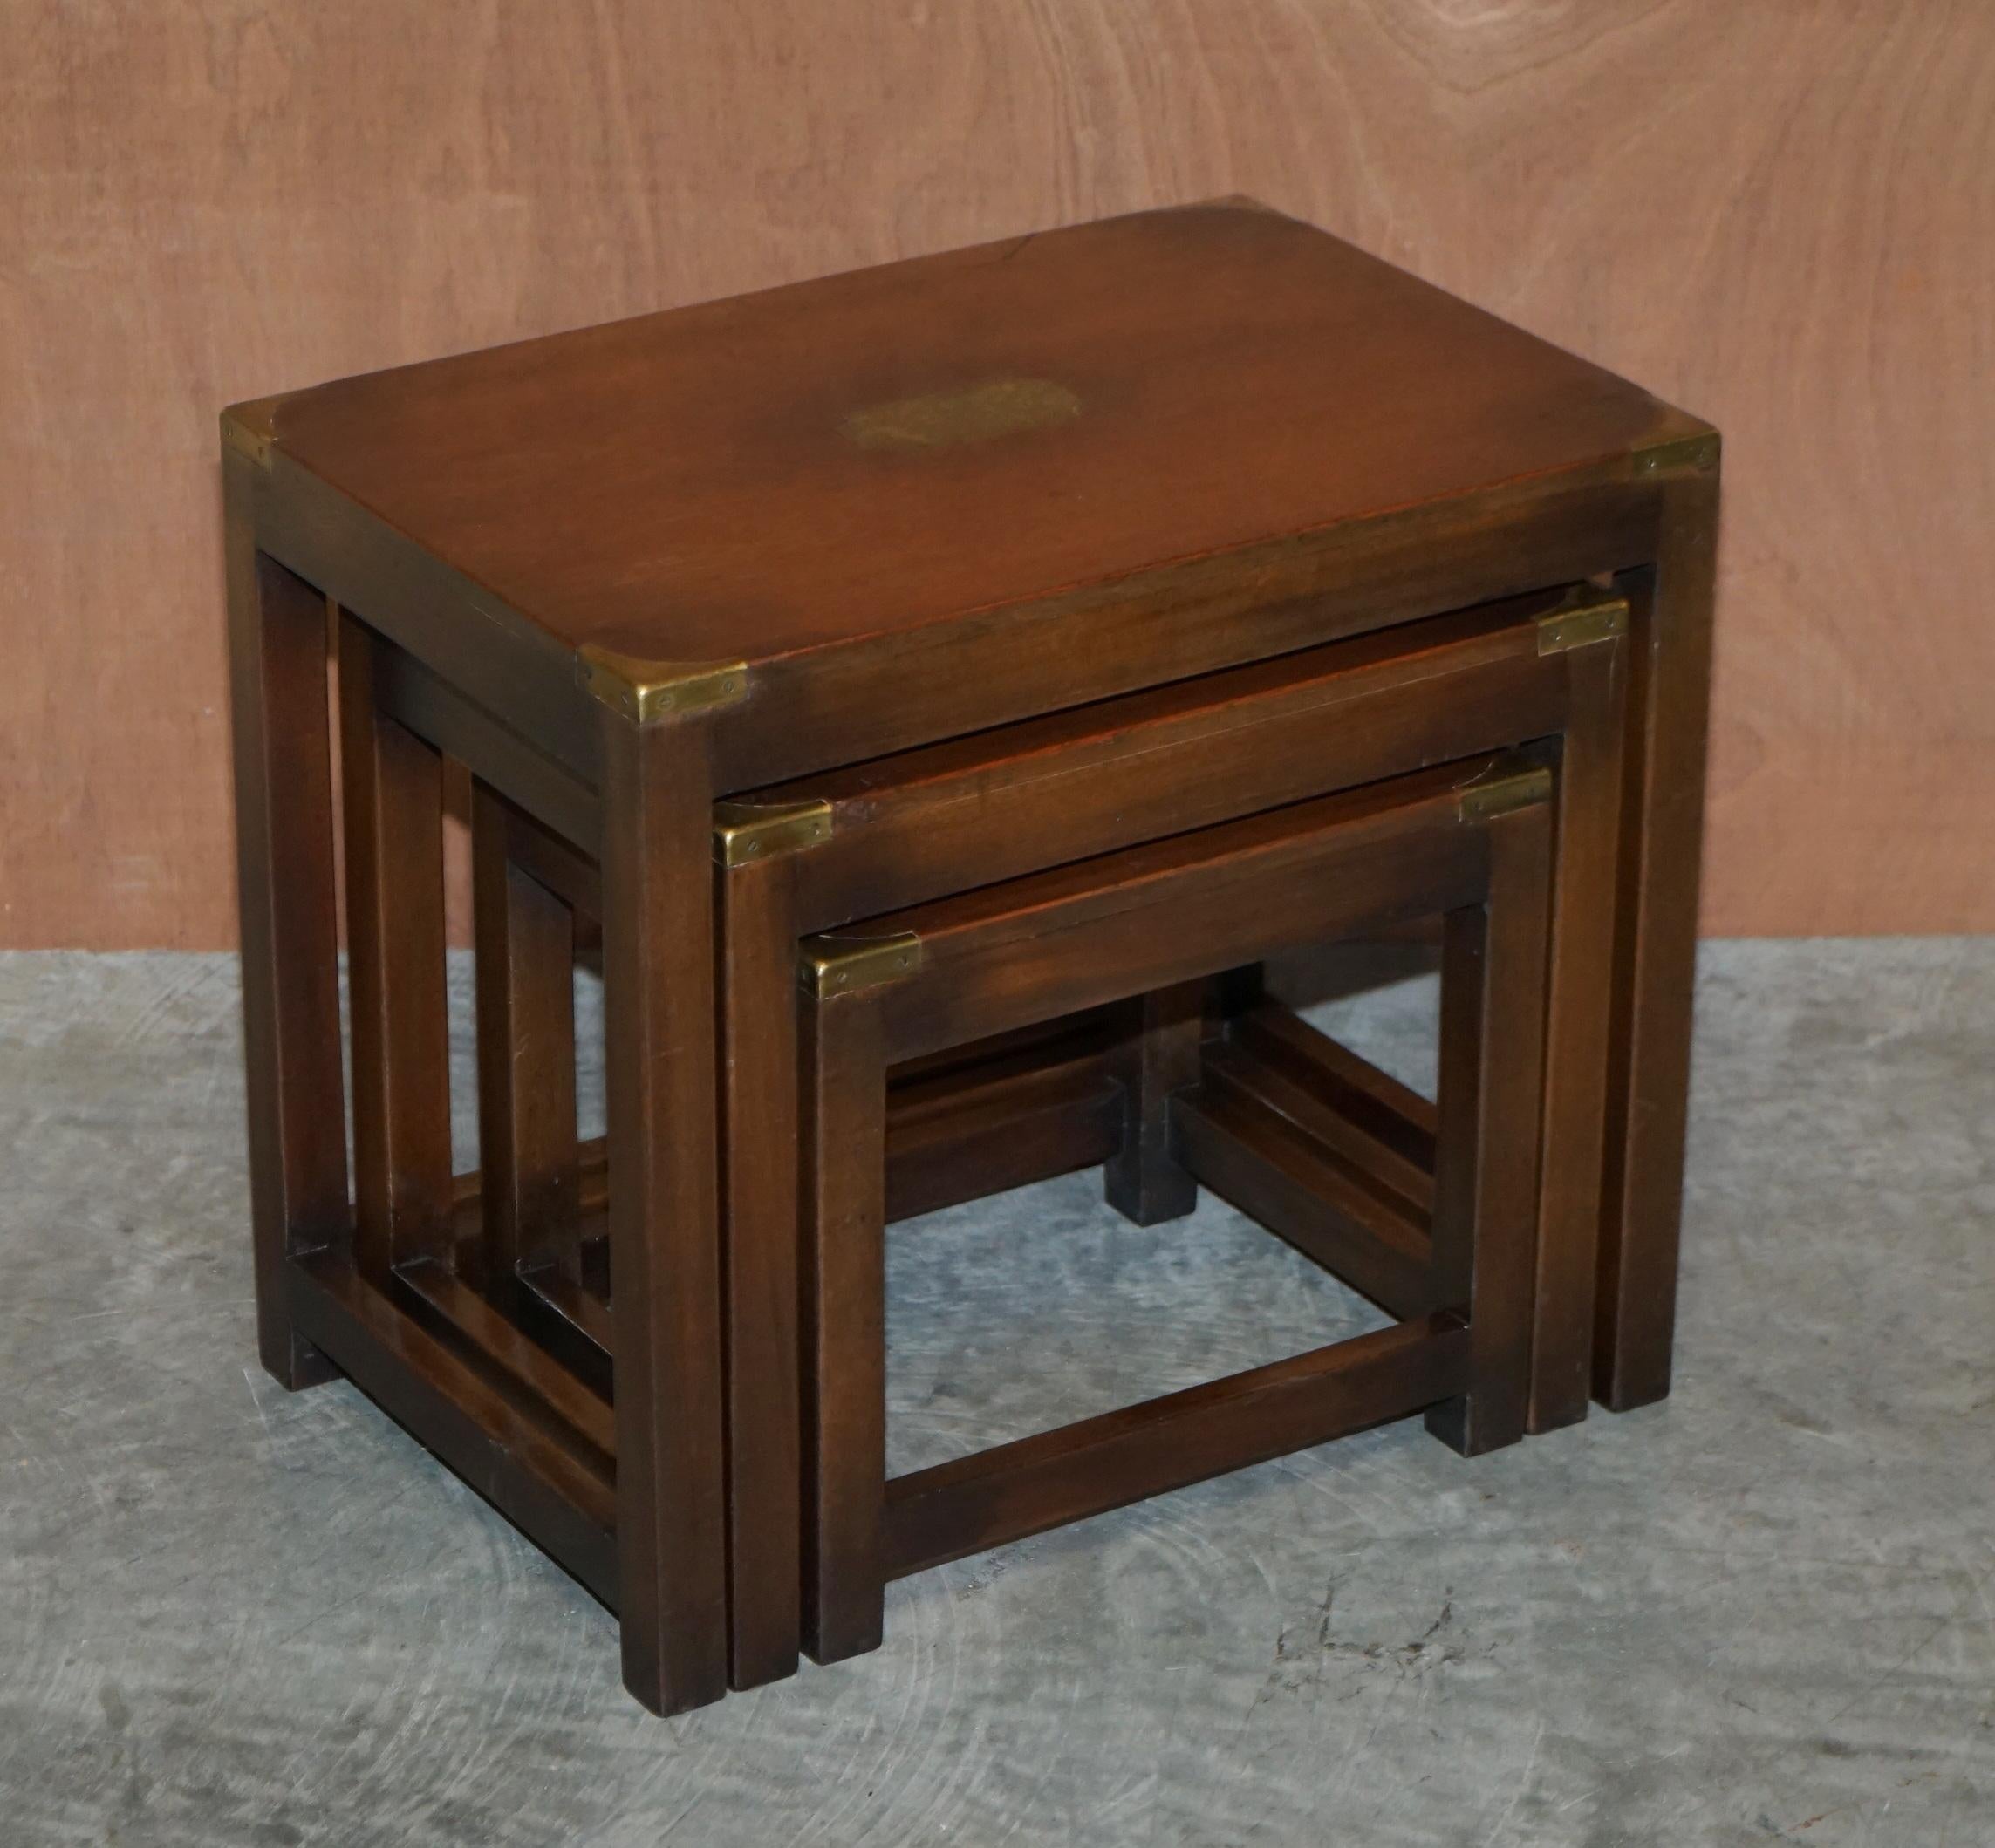 We are delighted to offer for sale this stunning and really quite rare, Kennedy furniture Harrods London Military Campaign nest of side tables

A good looking and well-made suite, absolutely iconic and highly collectable, I never really see the